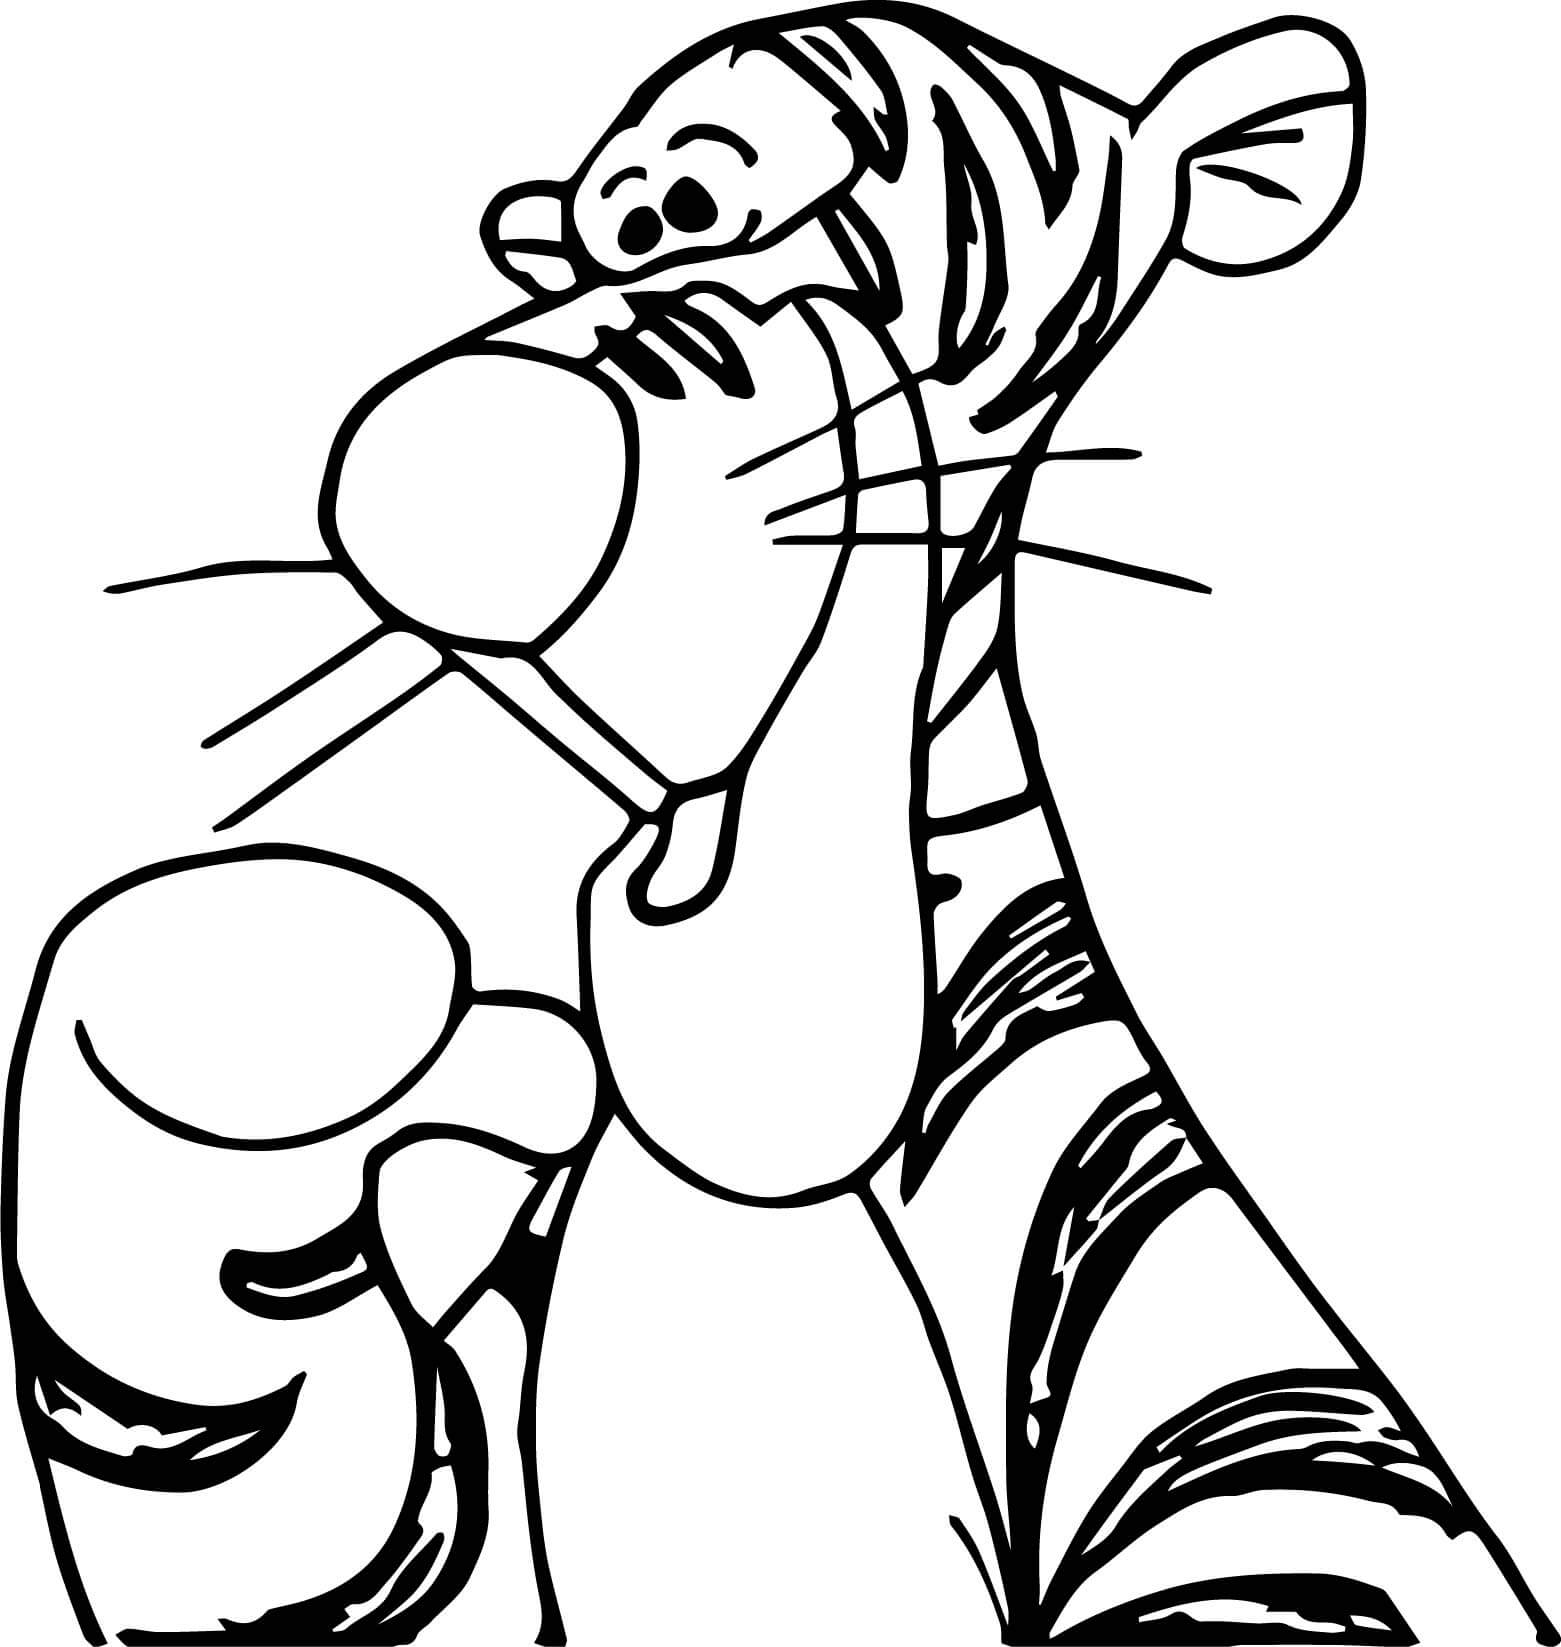 Im the Only One Tiger Coloring Page